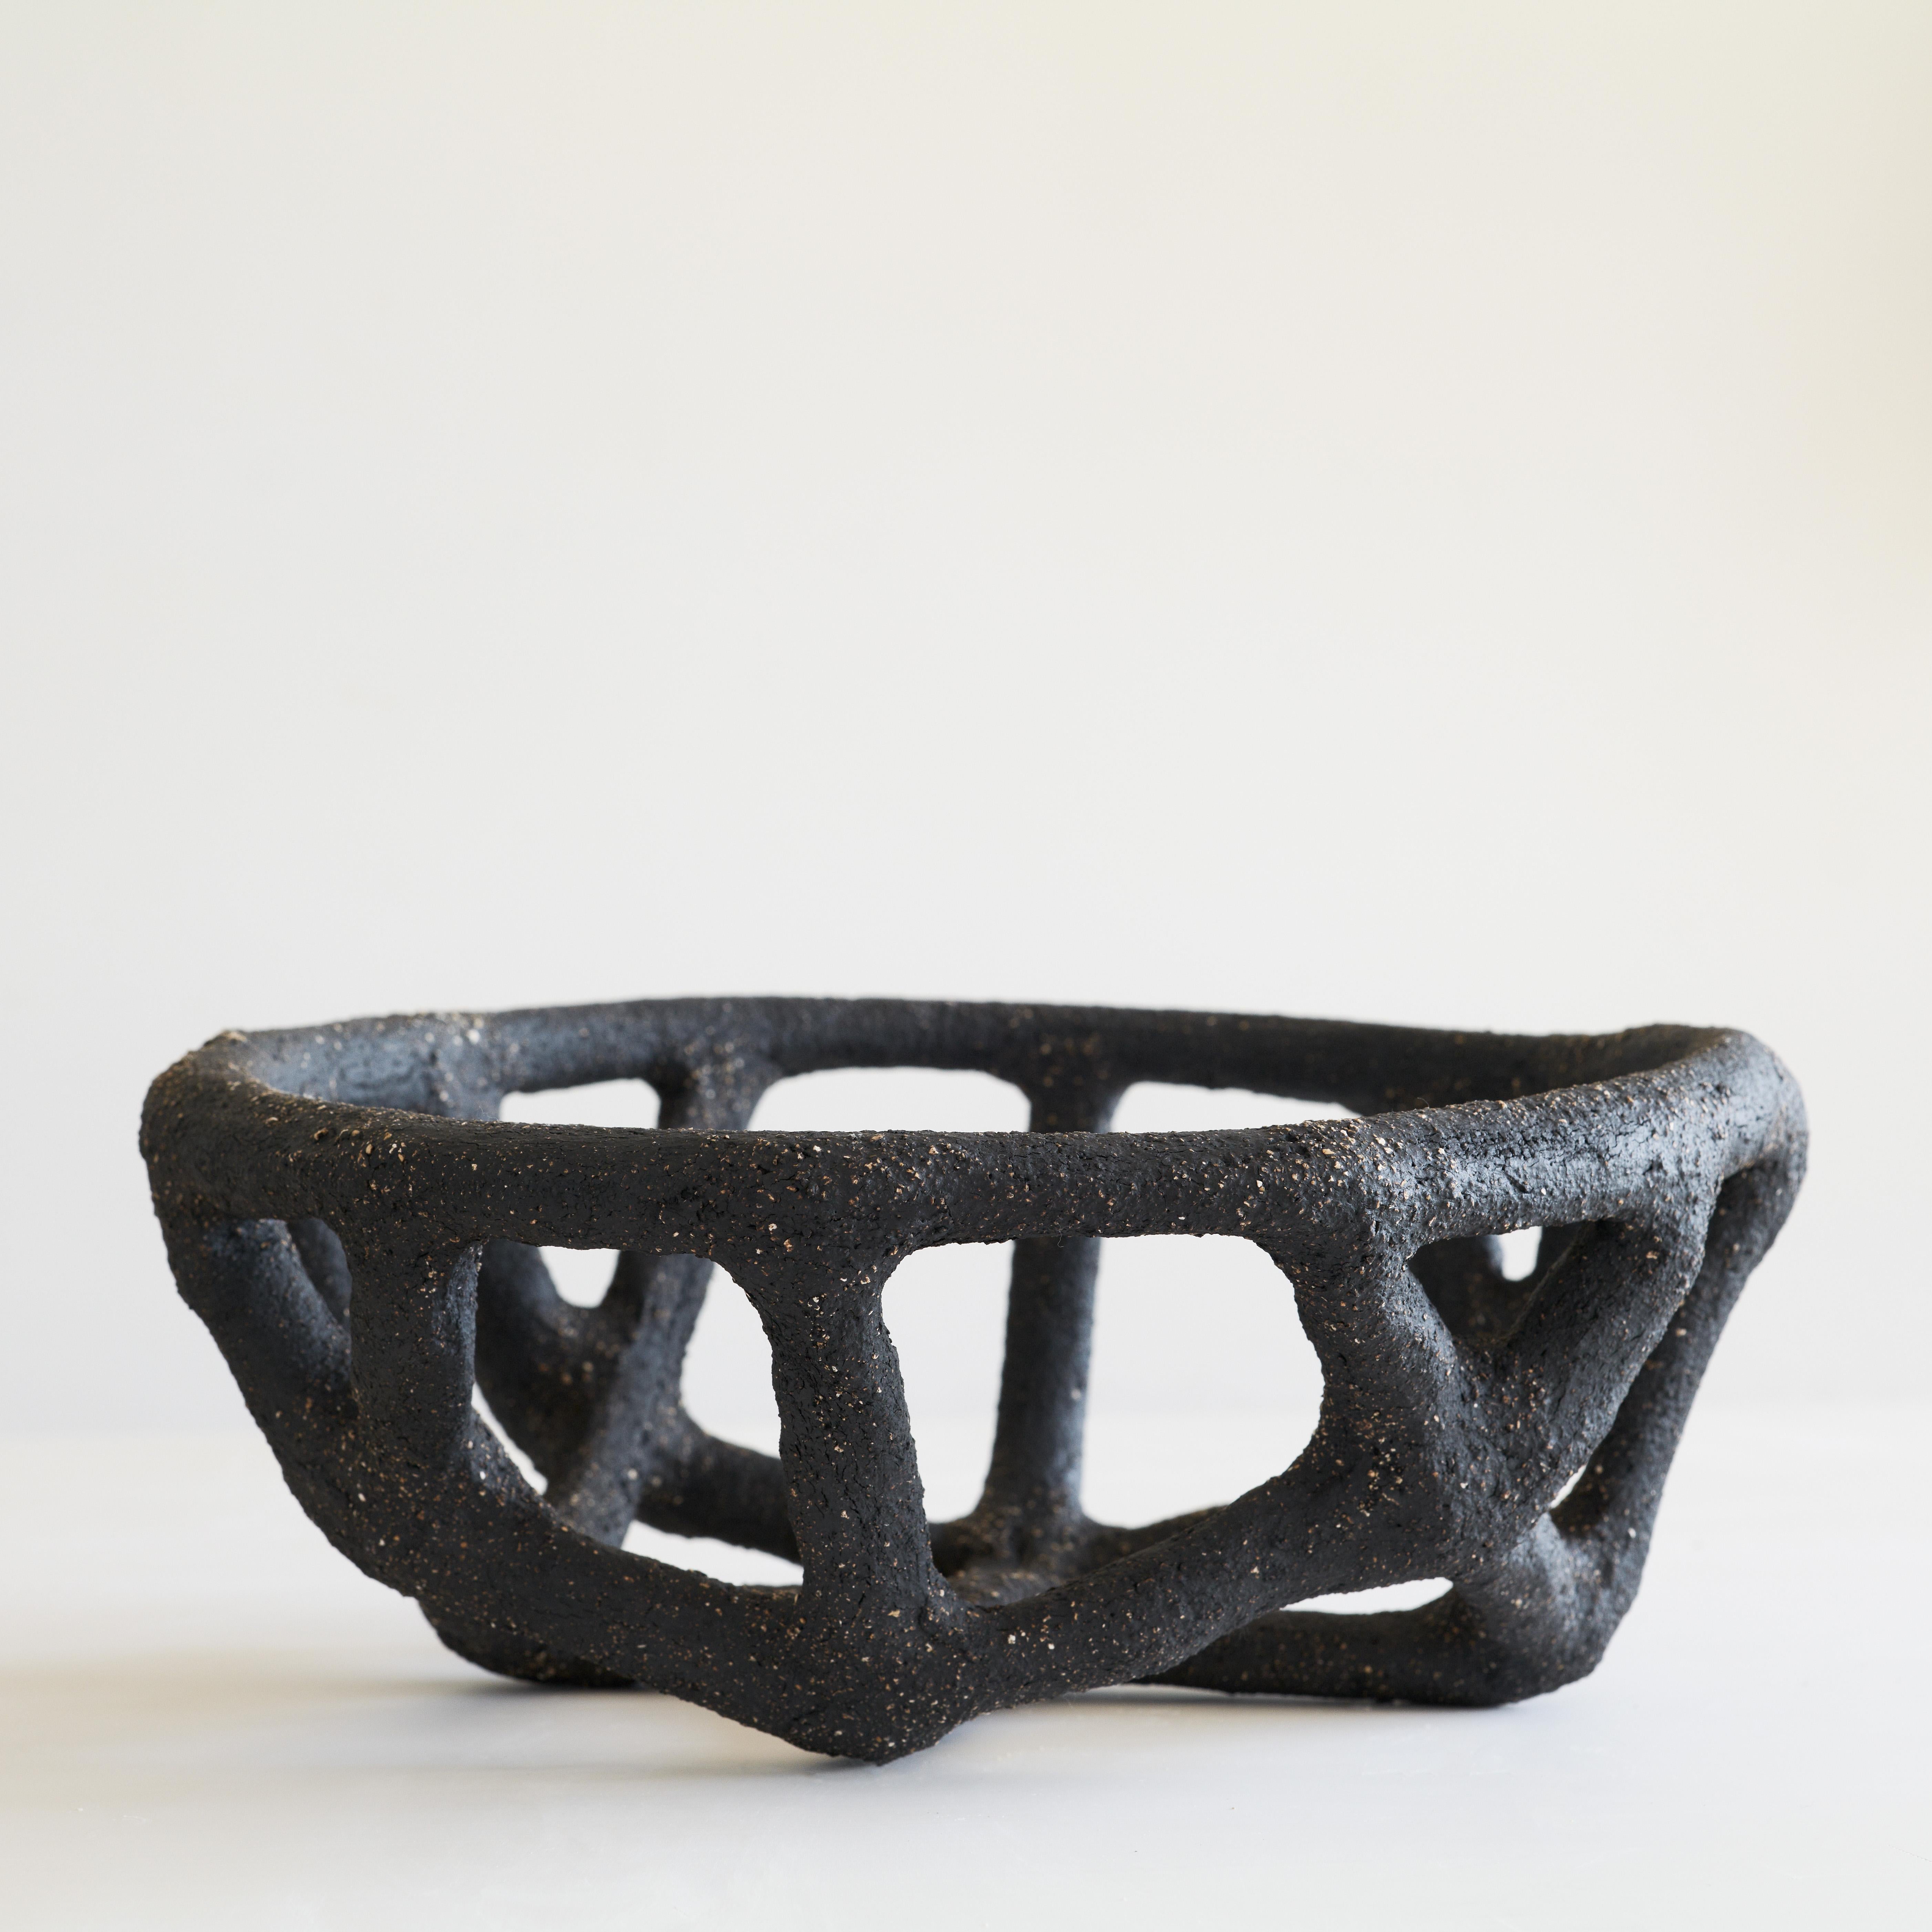 La Corbeille XXI Medium by Claire Pain 
Dimensions: D 33 x H 14 cm
Materials: Raw Stoneware

Fragility and delicacy arise from a raw material, in which strength and vigour intertwine to give shape to the singular work of Claire Pain.
Modeled